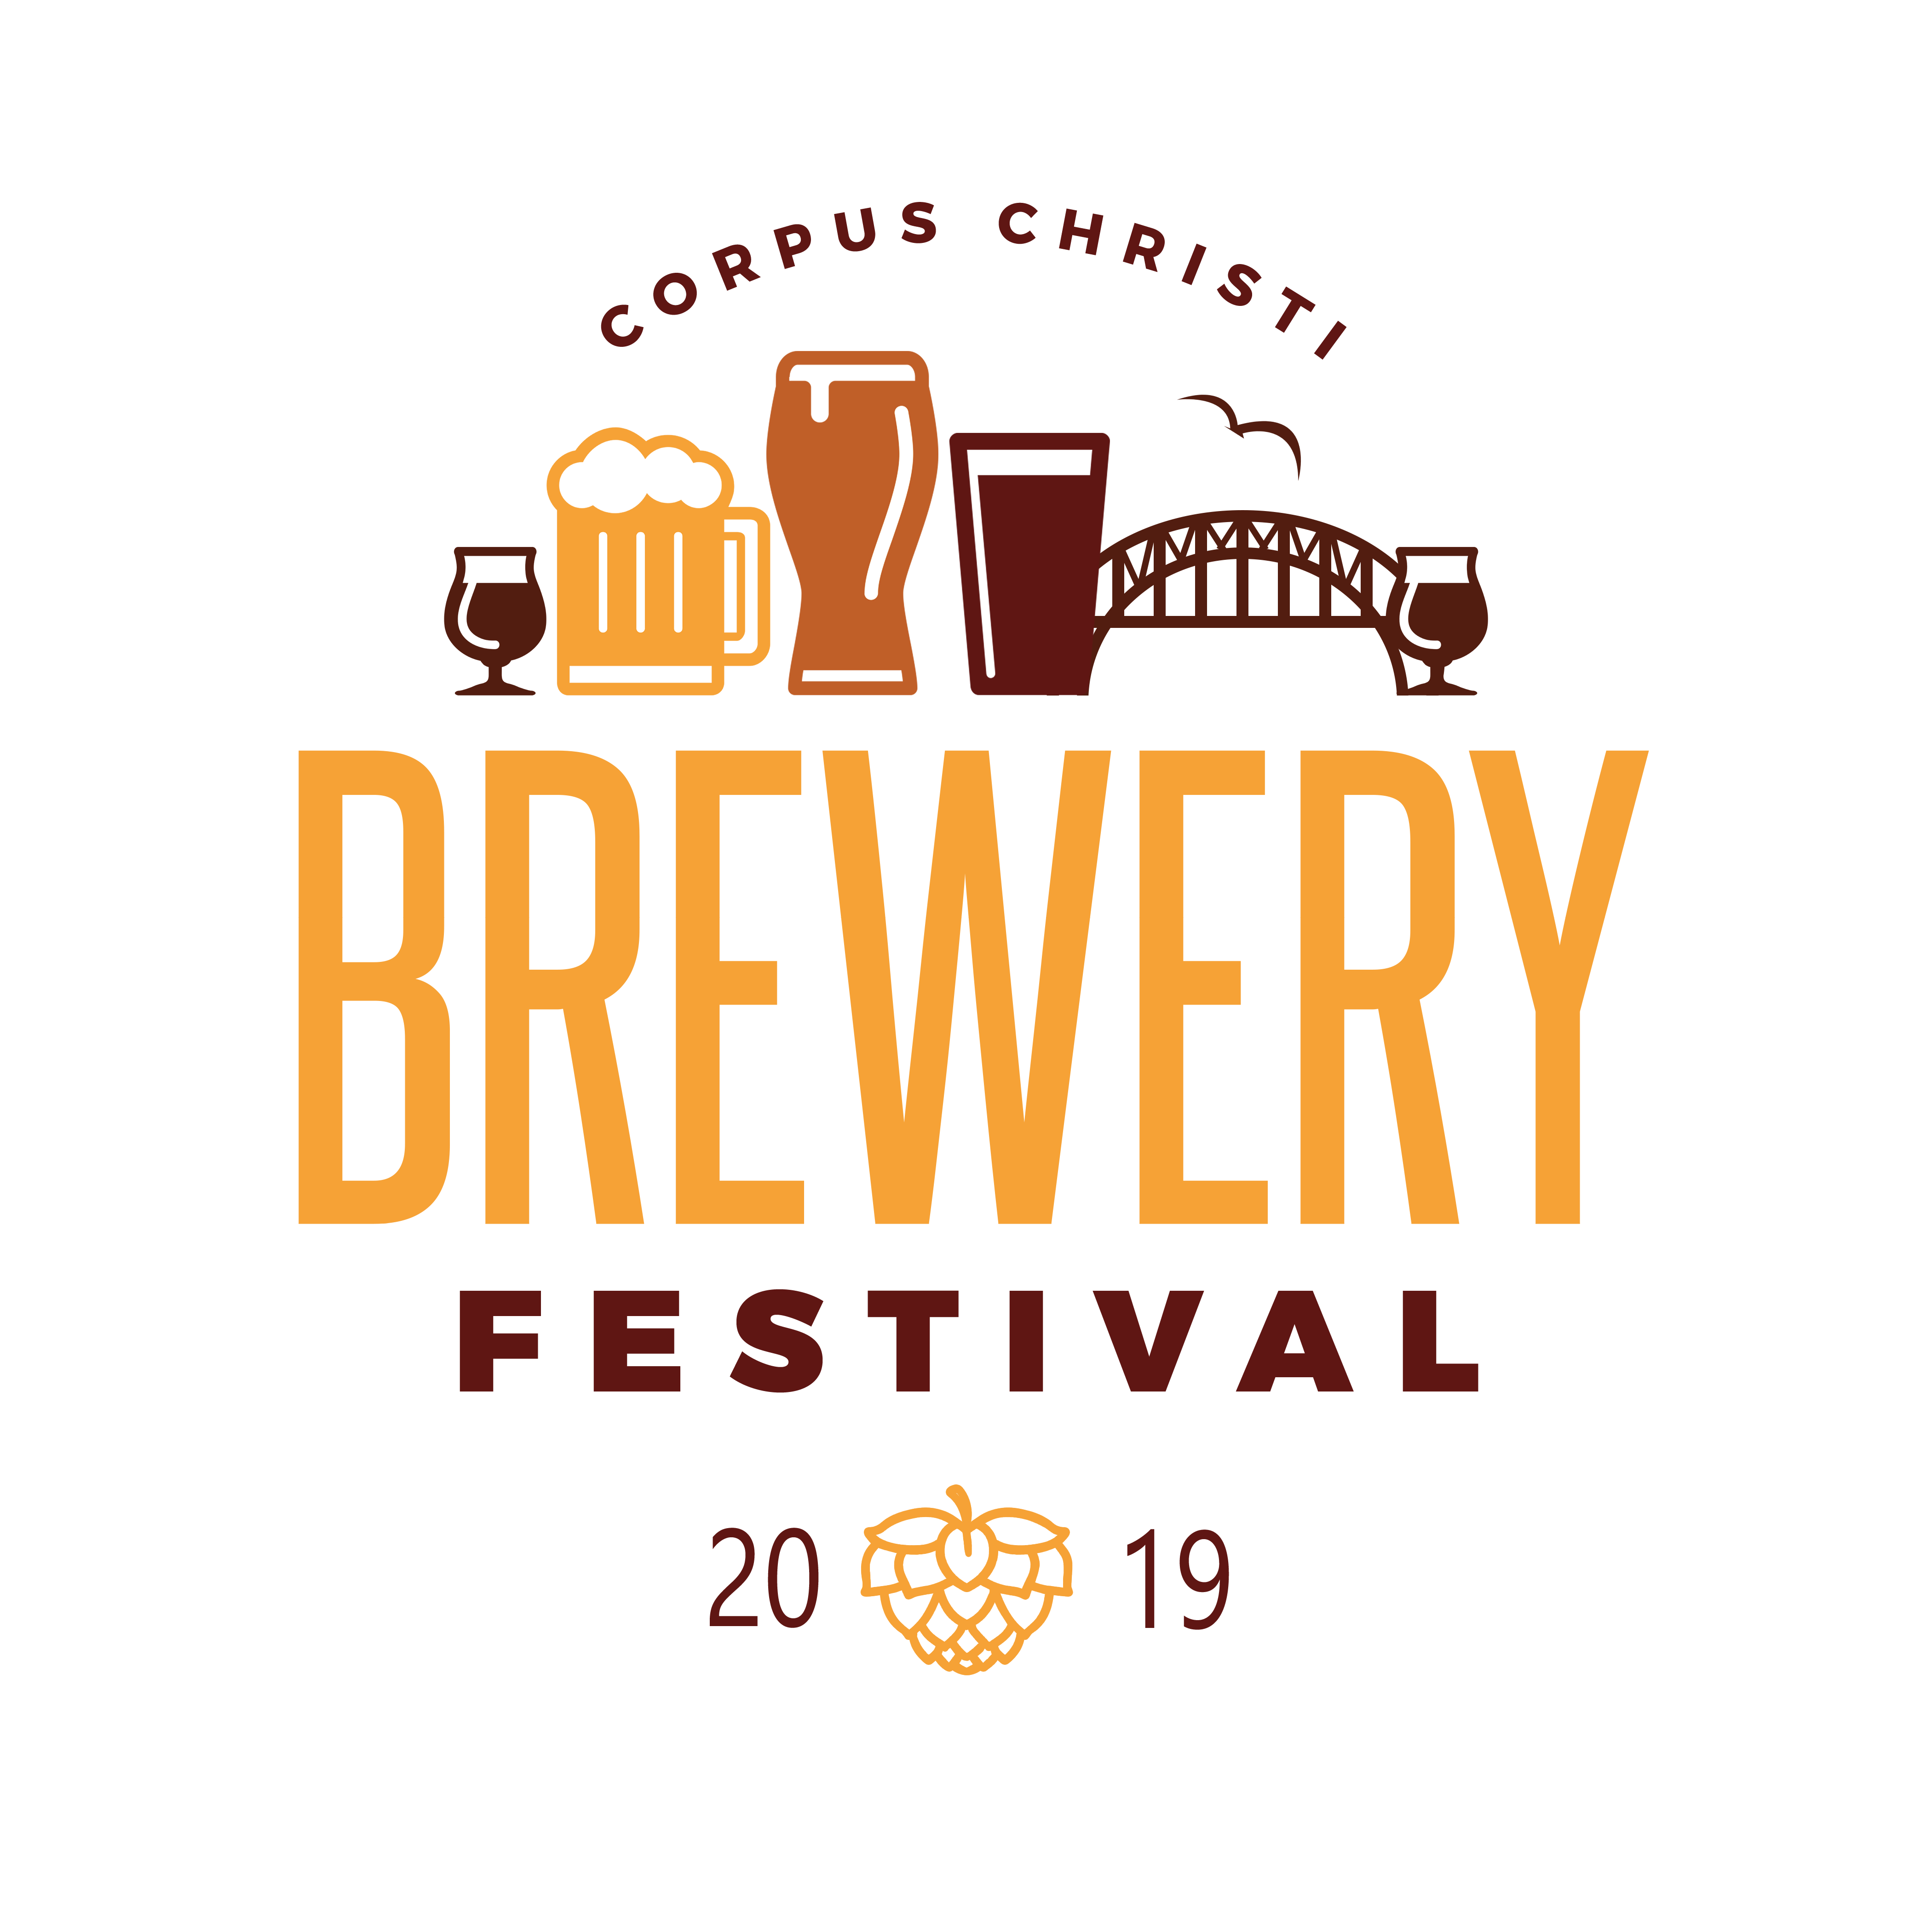 CC Brewery Festival  this Saturday!